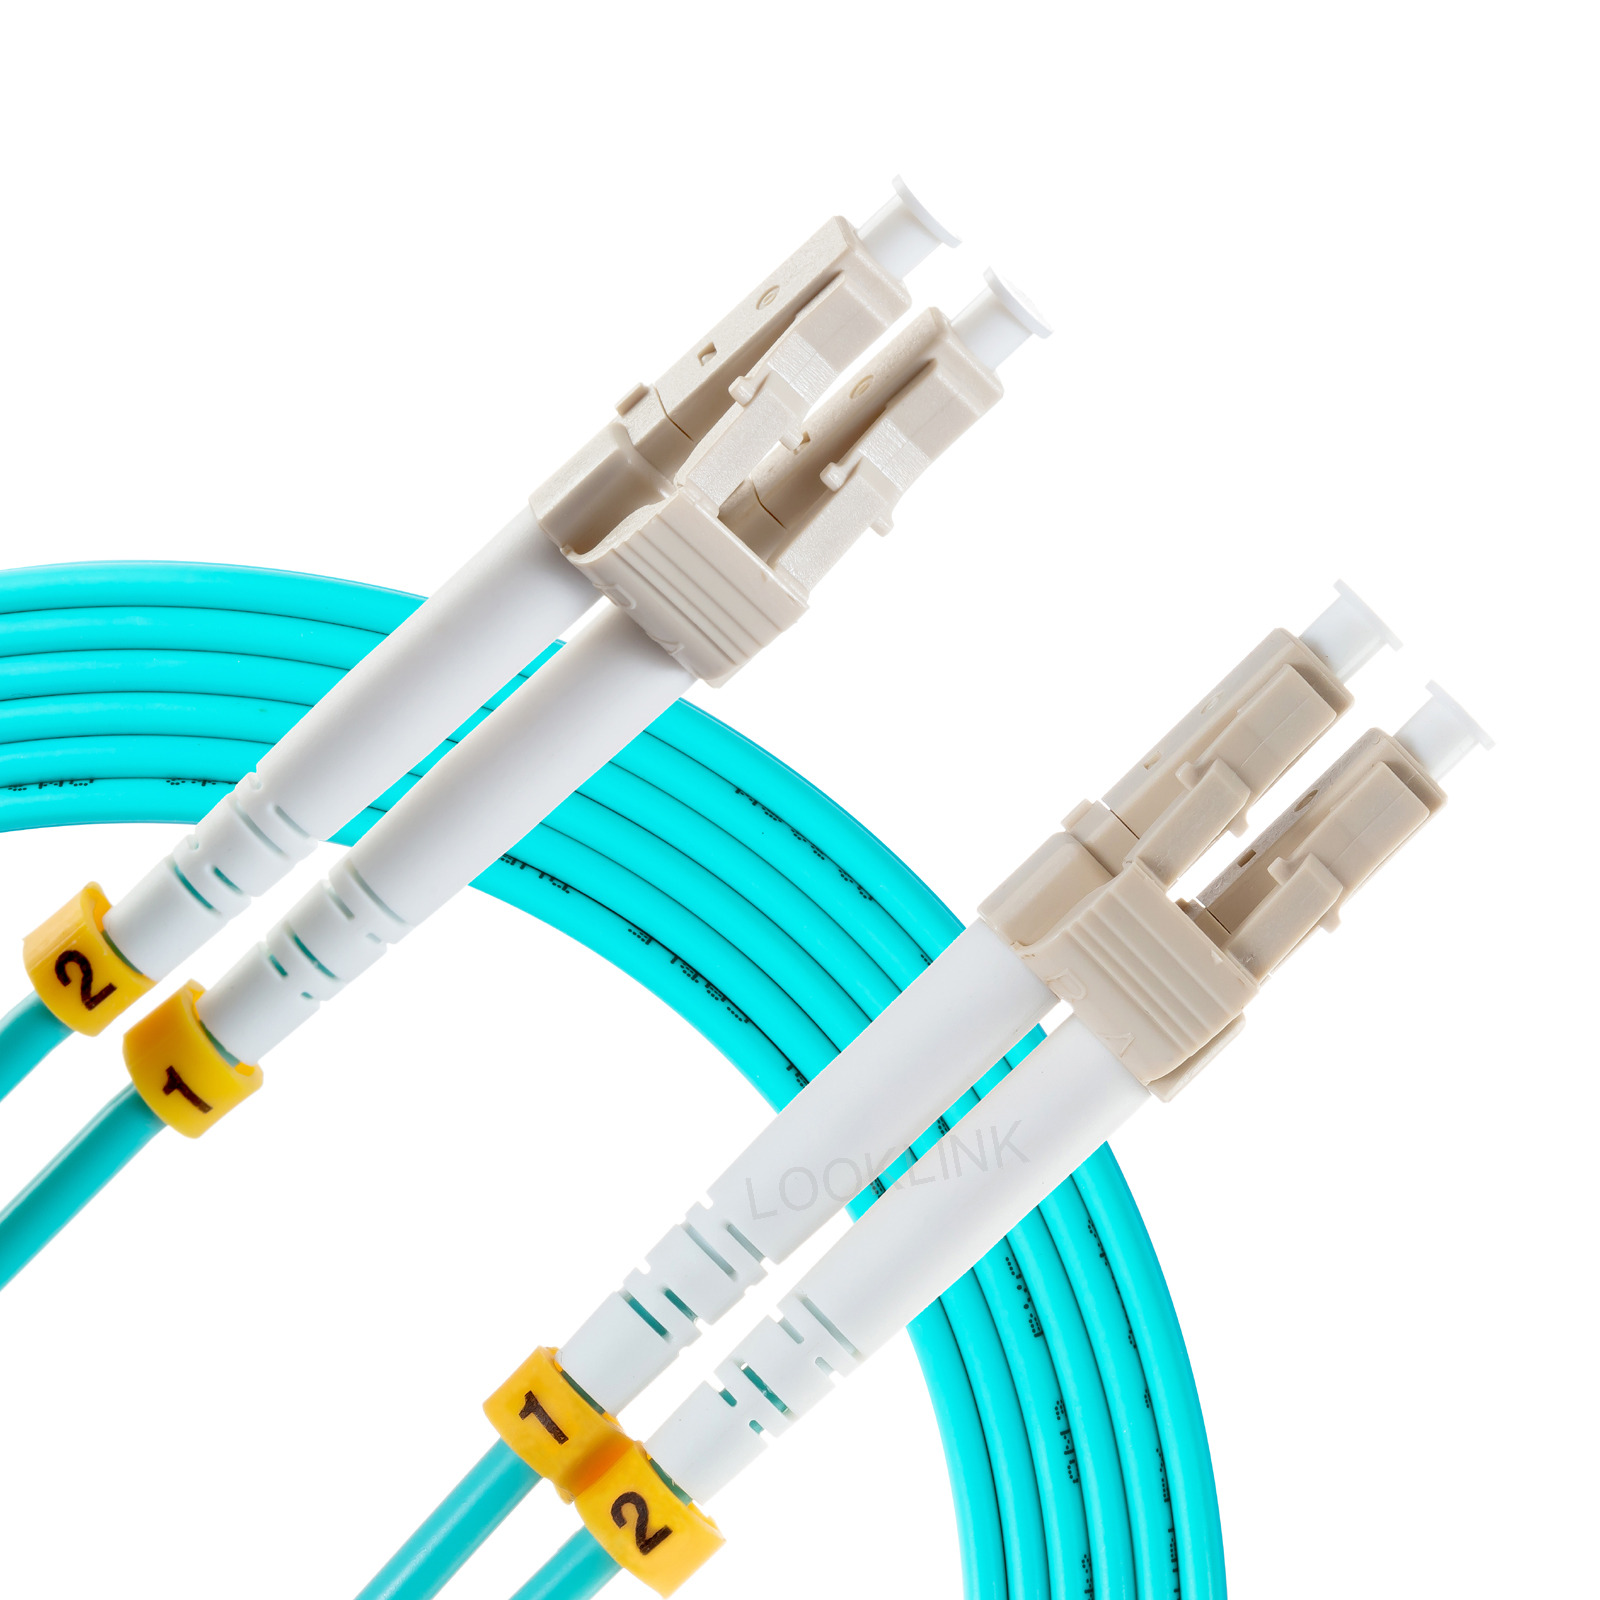 200M/656FT 3.0 10G-50/125 OM3 Multimode Duplex LC to LC Fiber Optic Patch Cable